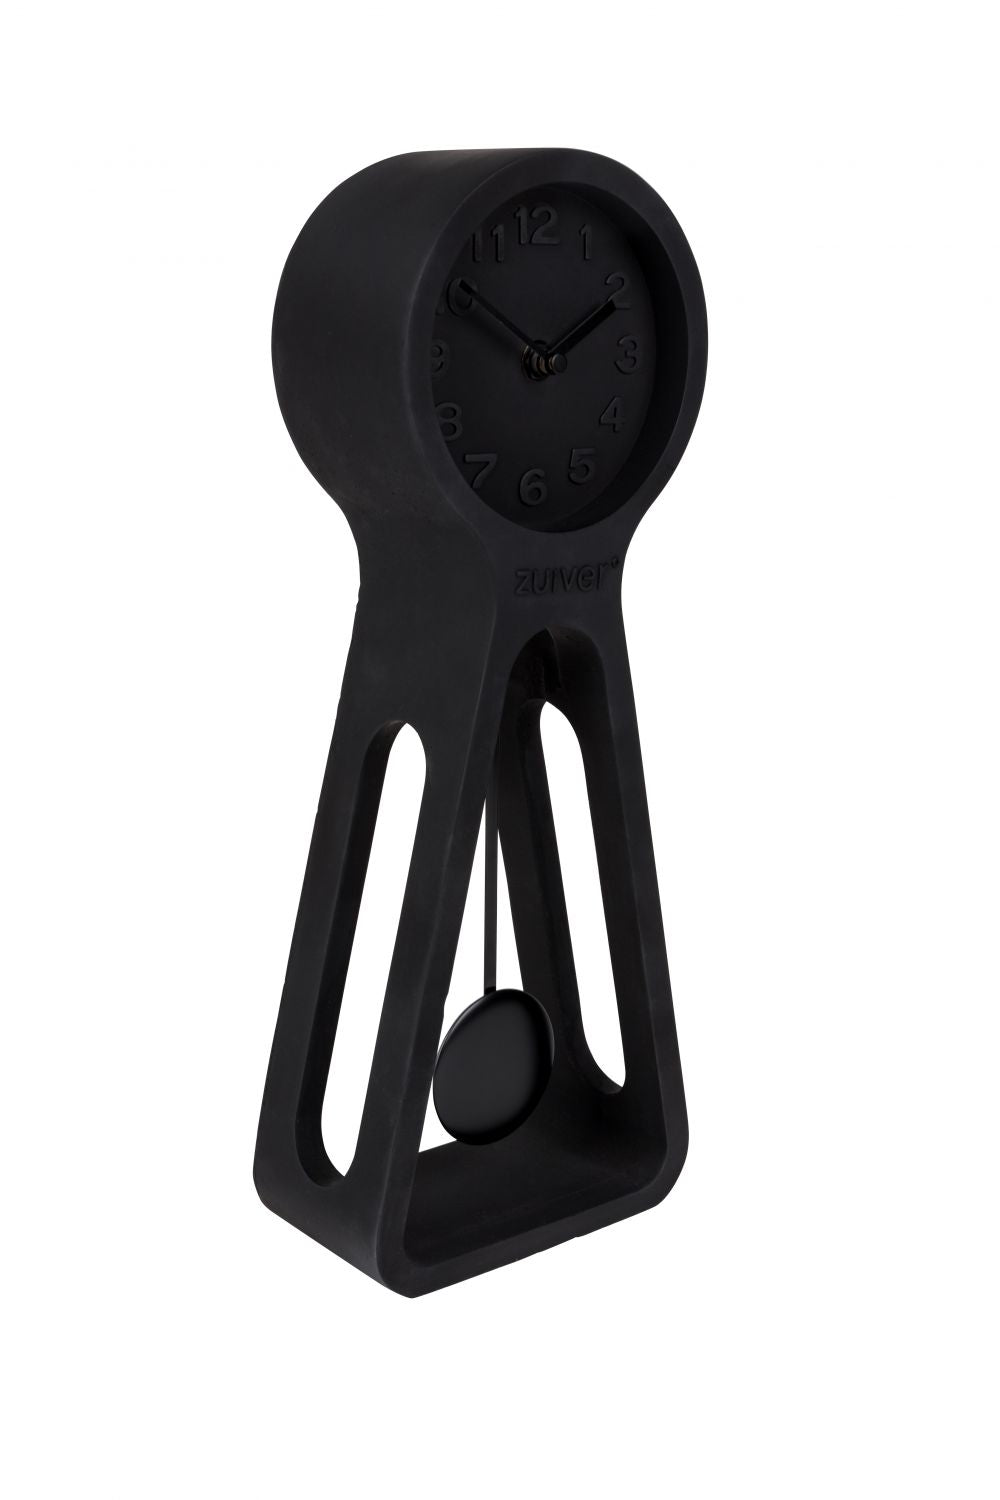  Zuiver-PACK SIZE ISSUE - DO NOT LIST - Zuiver Pendulum Clock Time All Black-Black 37 